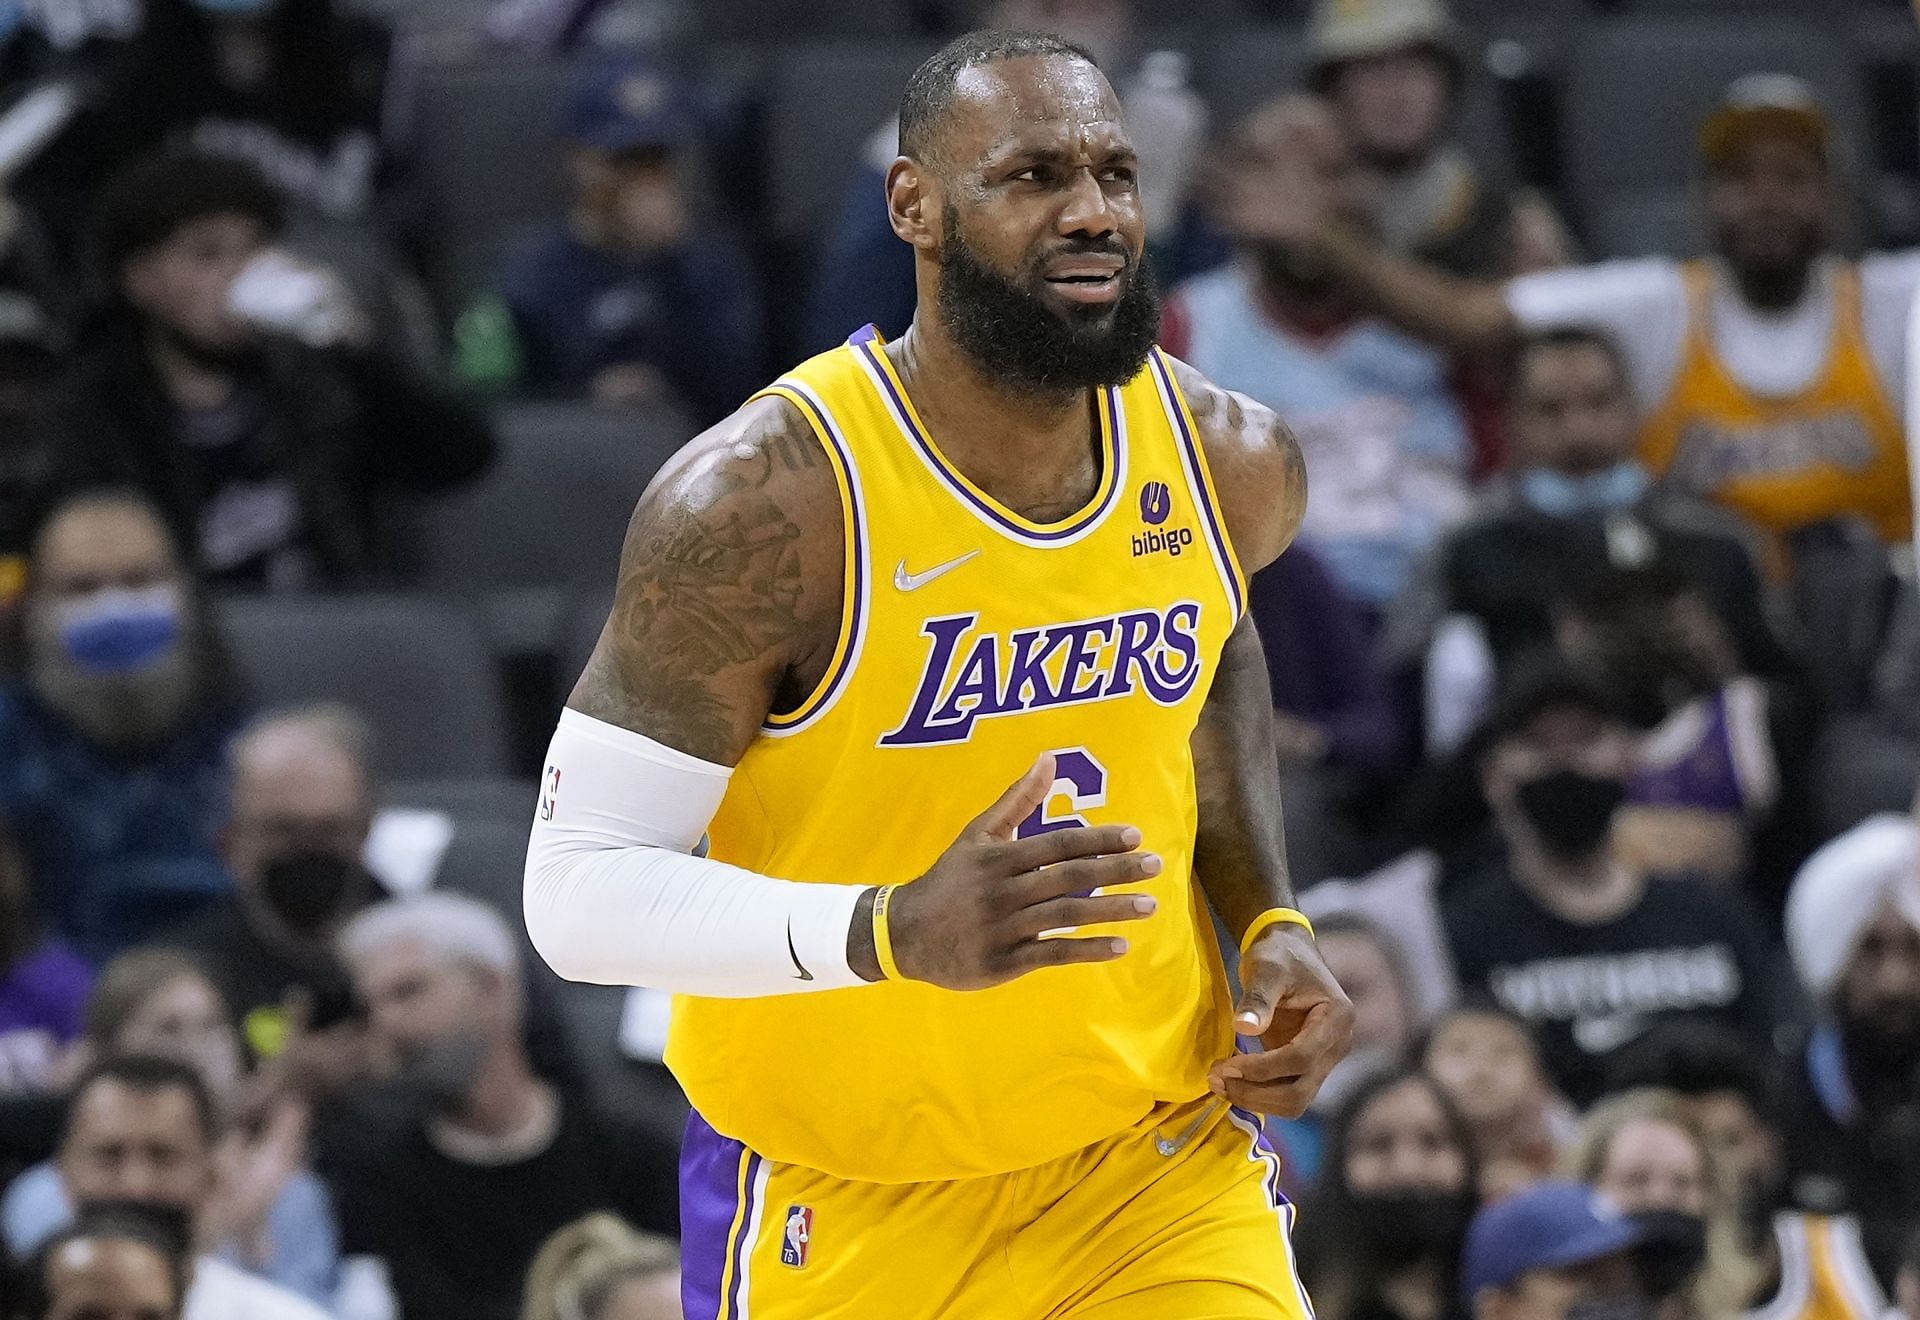 LeBron James of the LA Lakers is averaging 29.1 points per game this season.